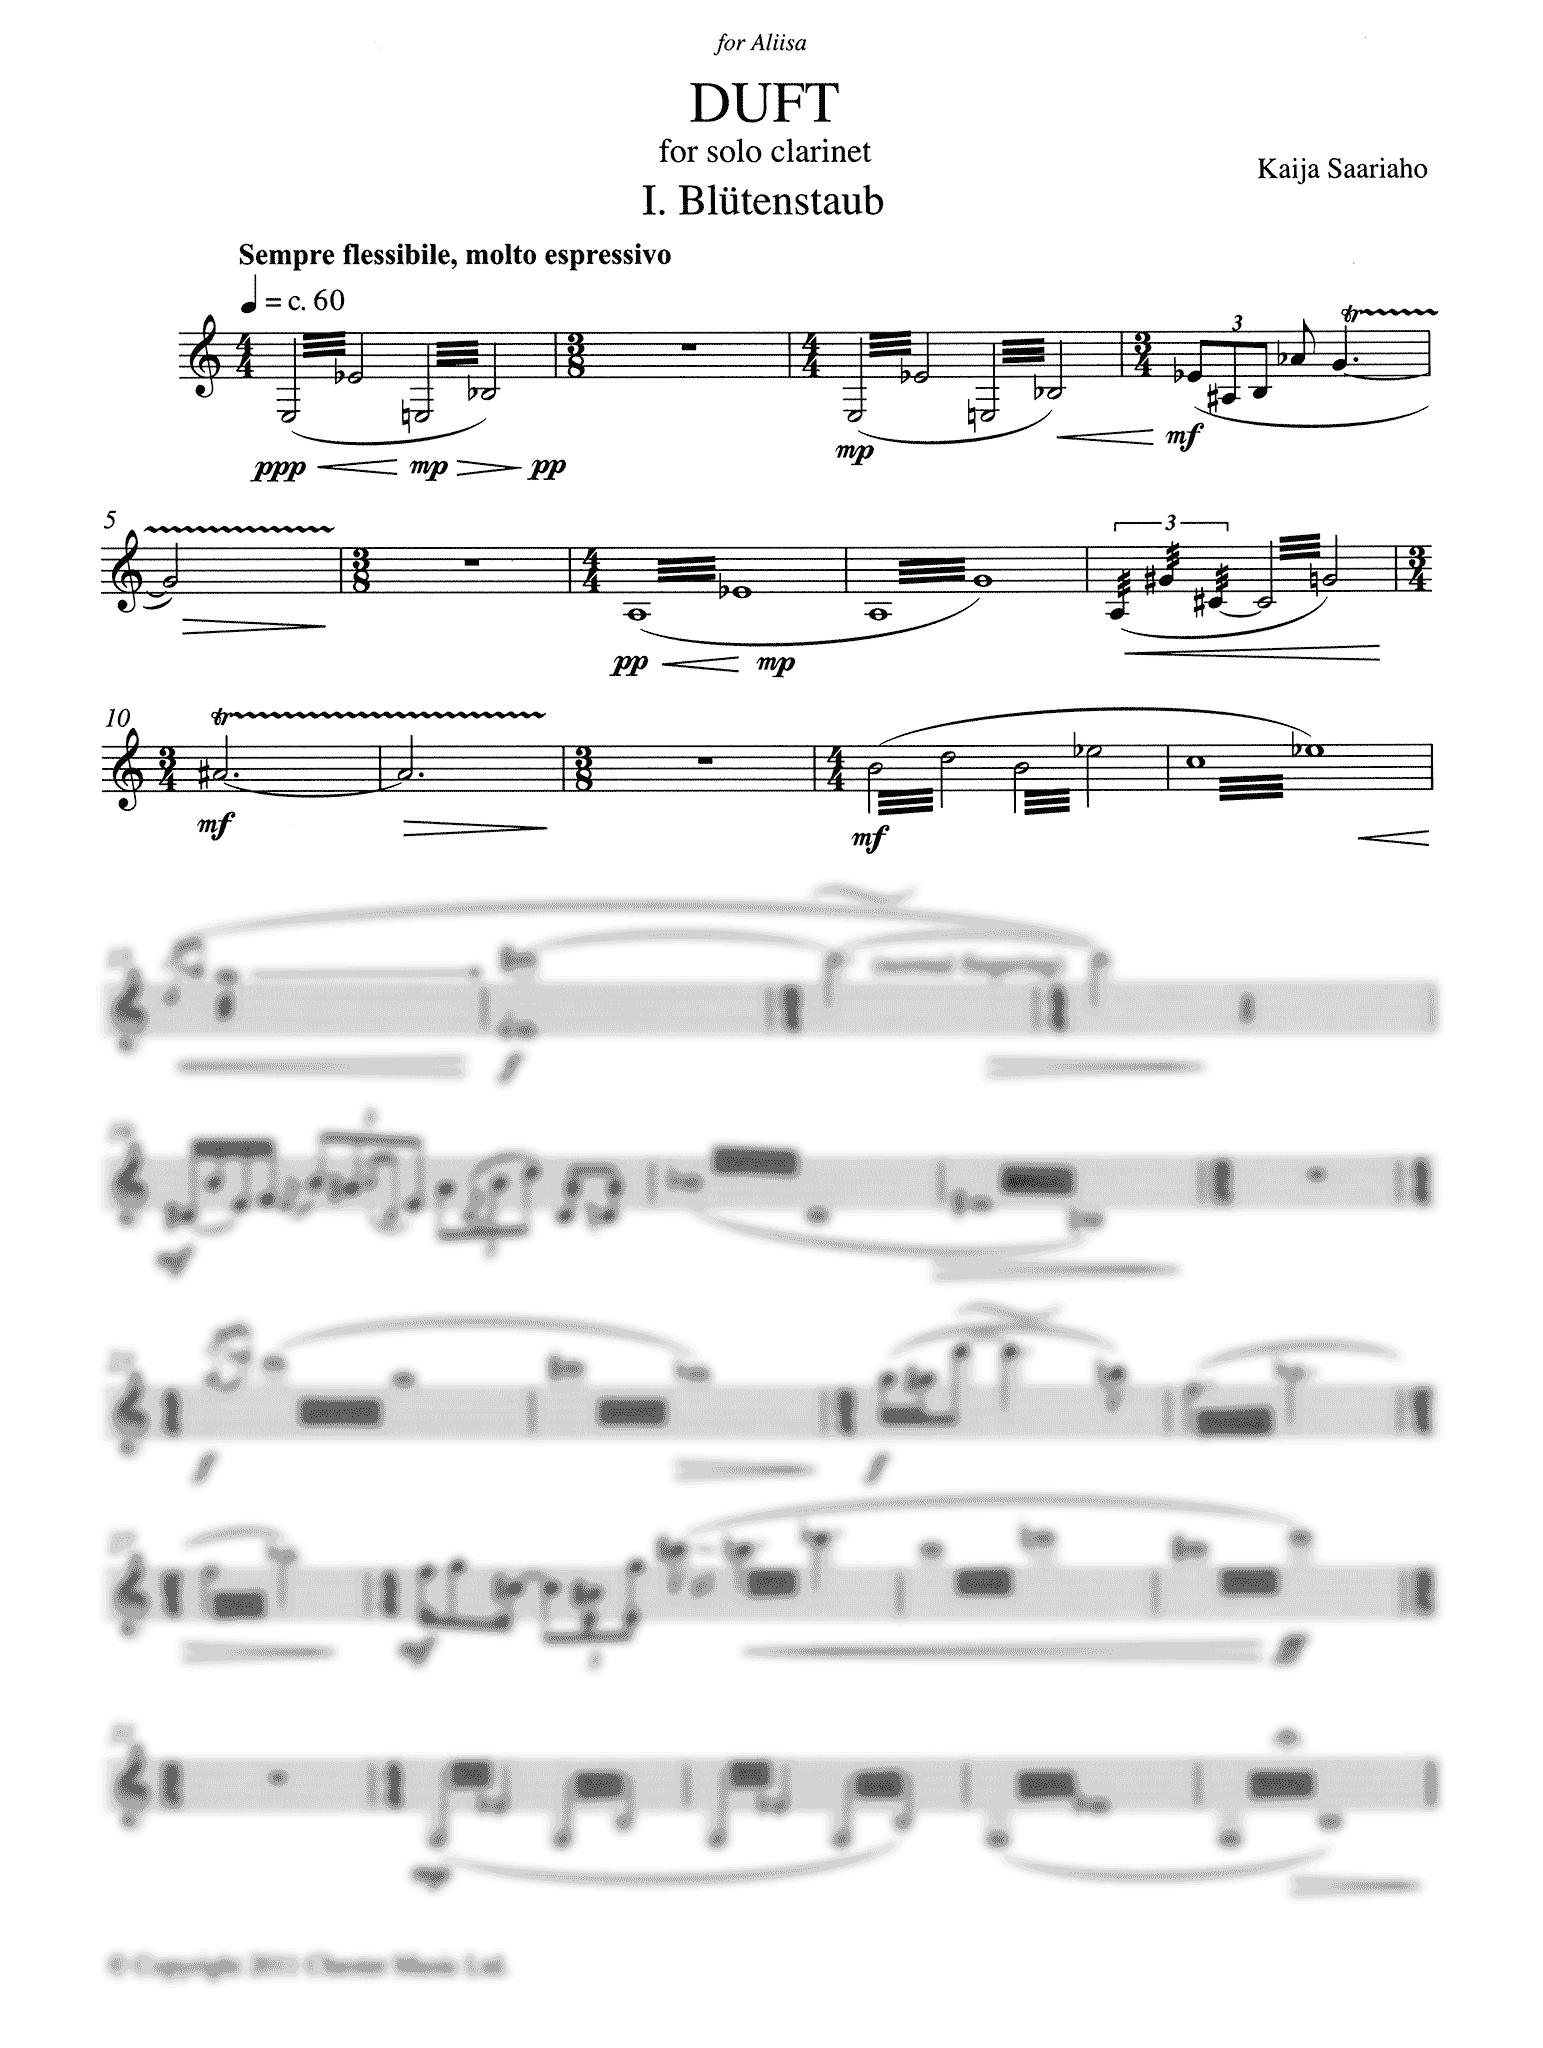 Saariaho Duft for solo clarinet - Movement 1